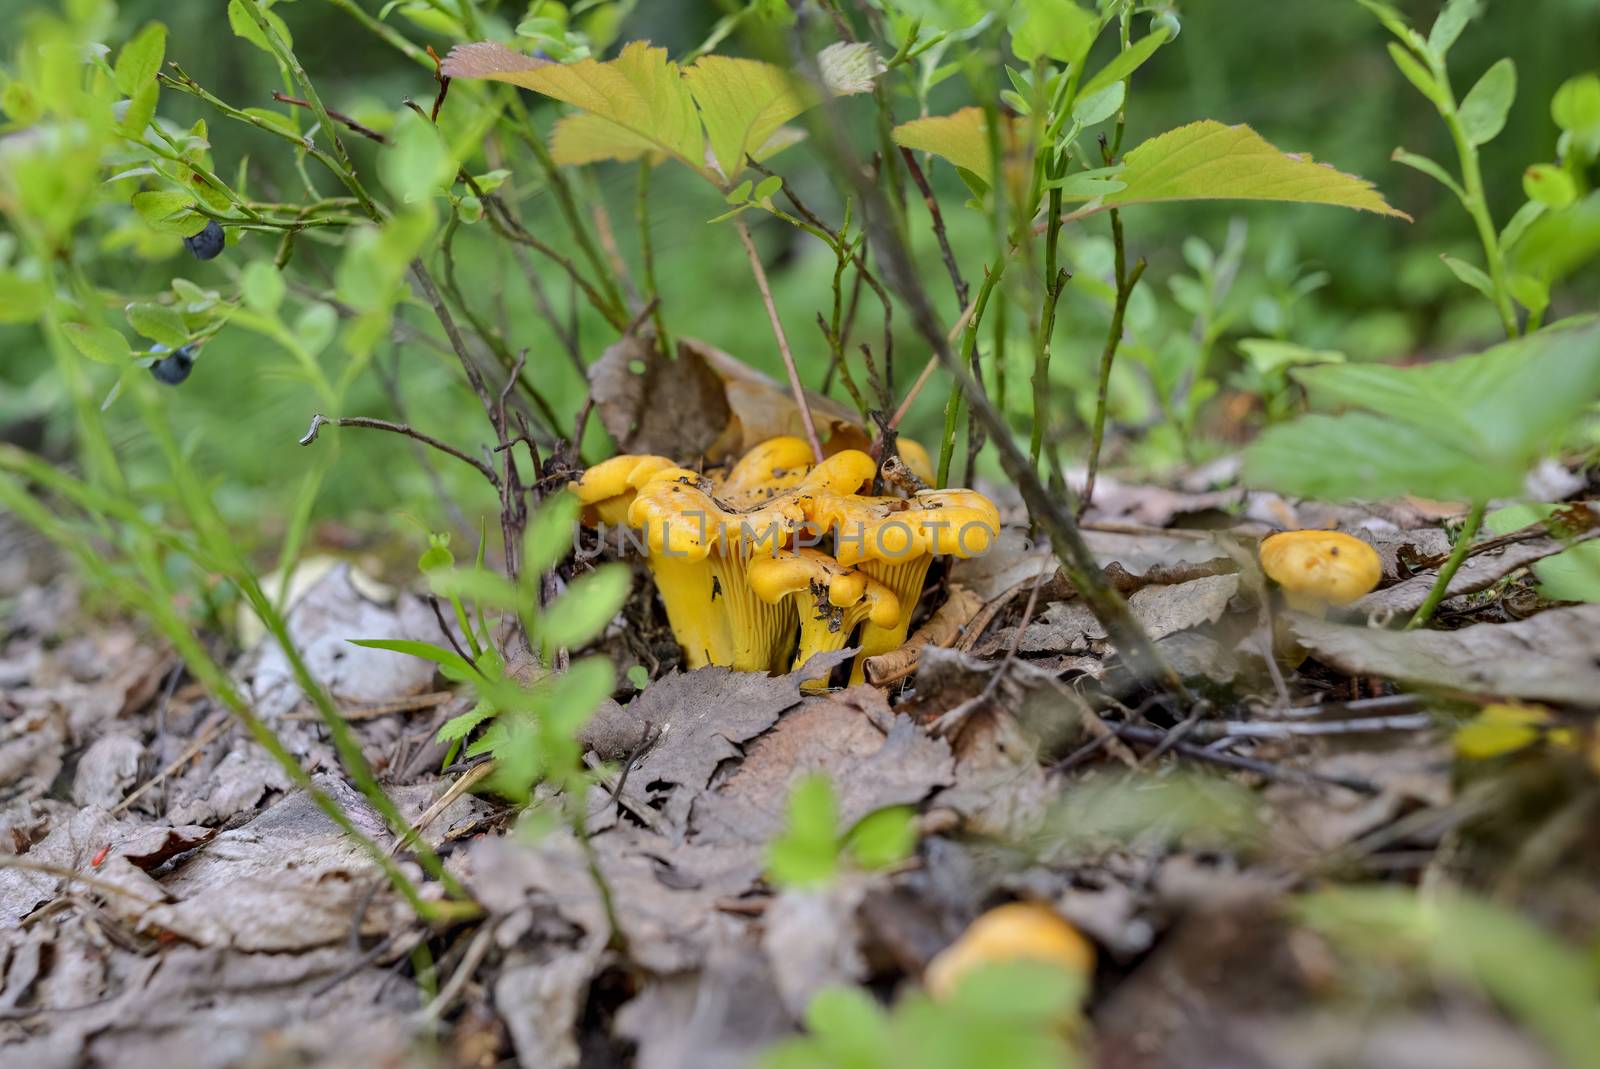 A family of yellow mushrooms in a forest bed of leaves under green grass.